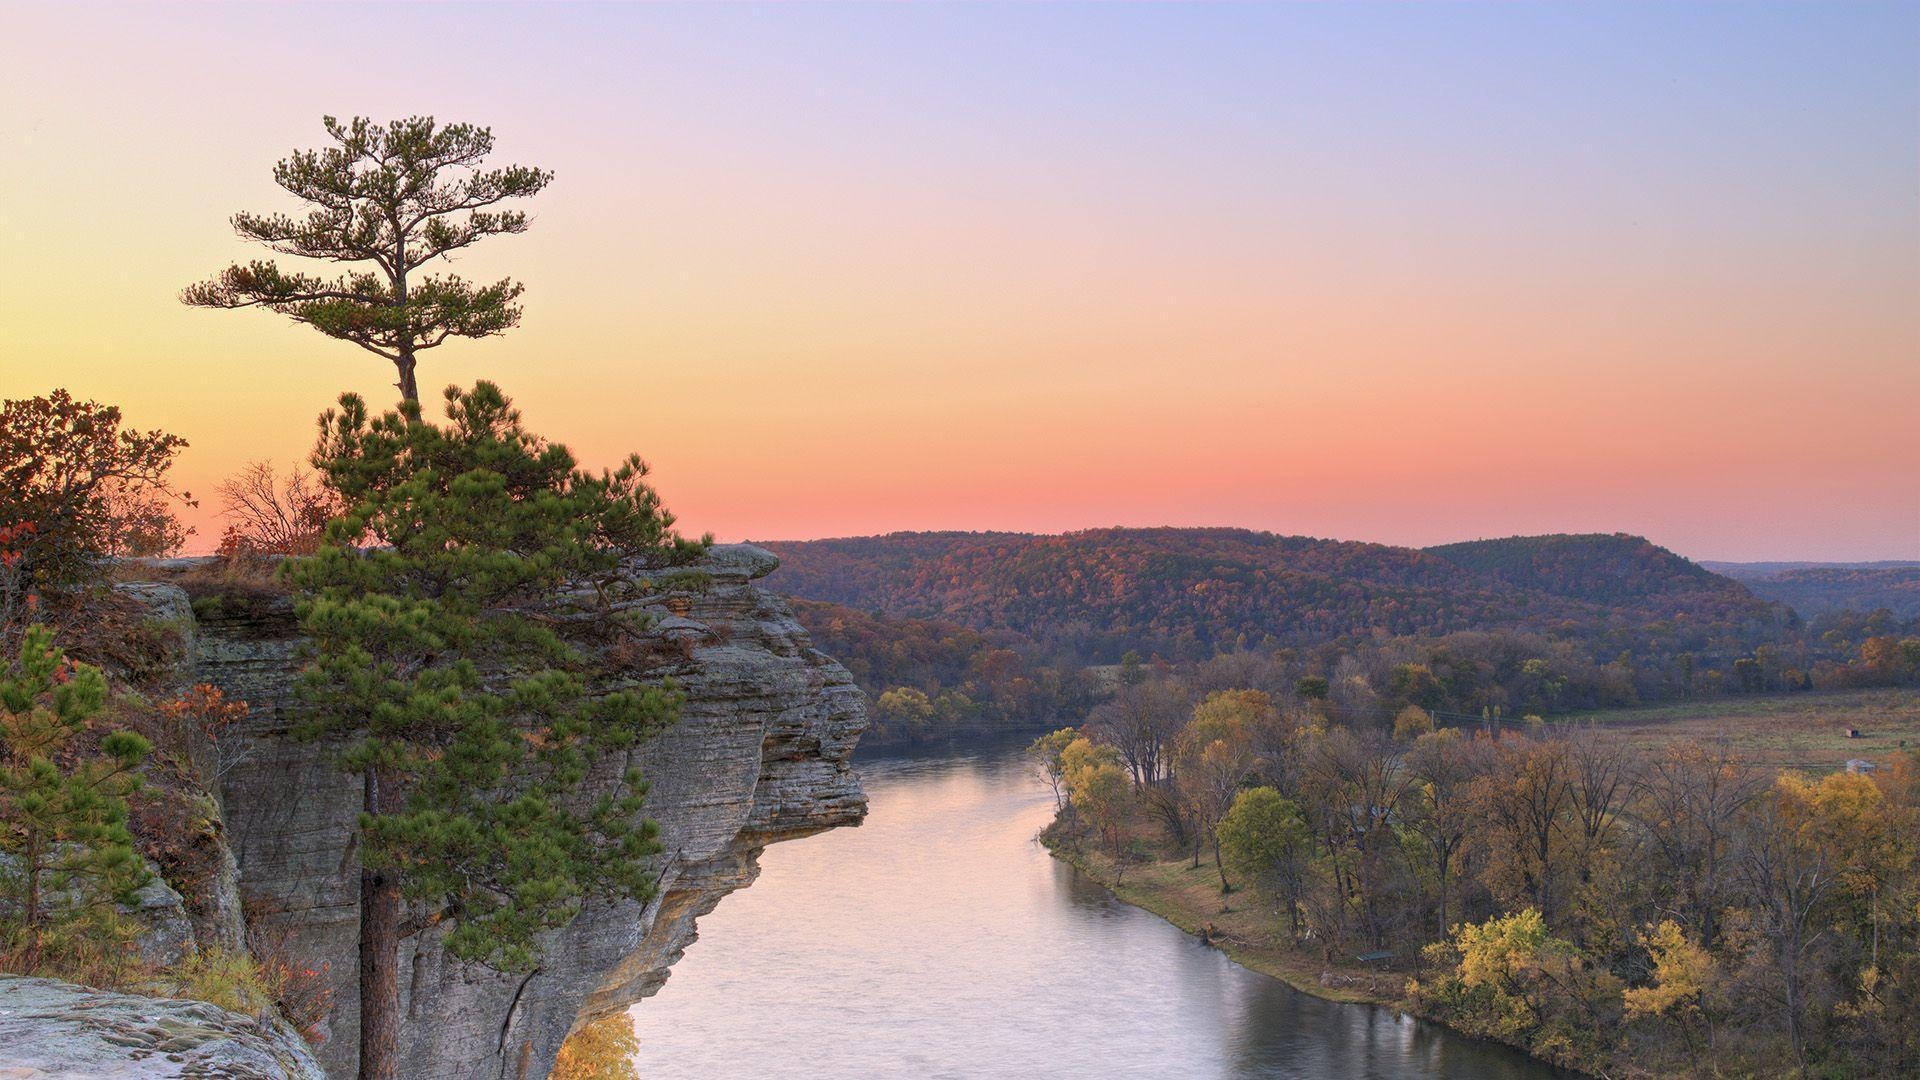 Arkansas: Contains of 75 counties and 52 state parks, Natural landscape. 1920x1080 Full HD Background.